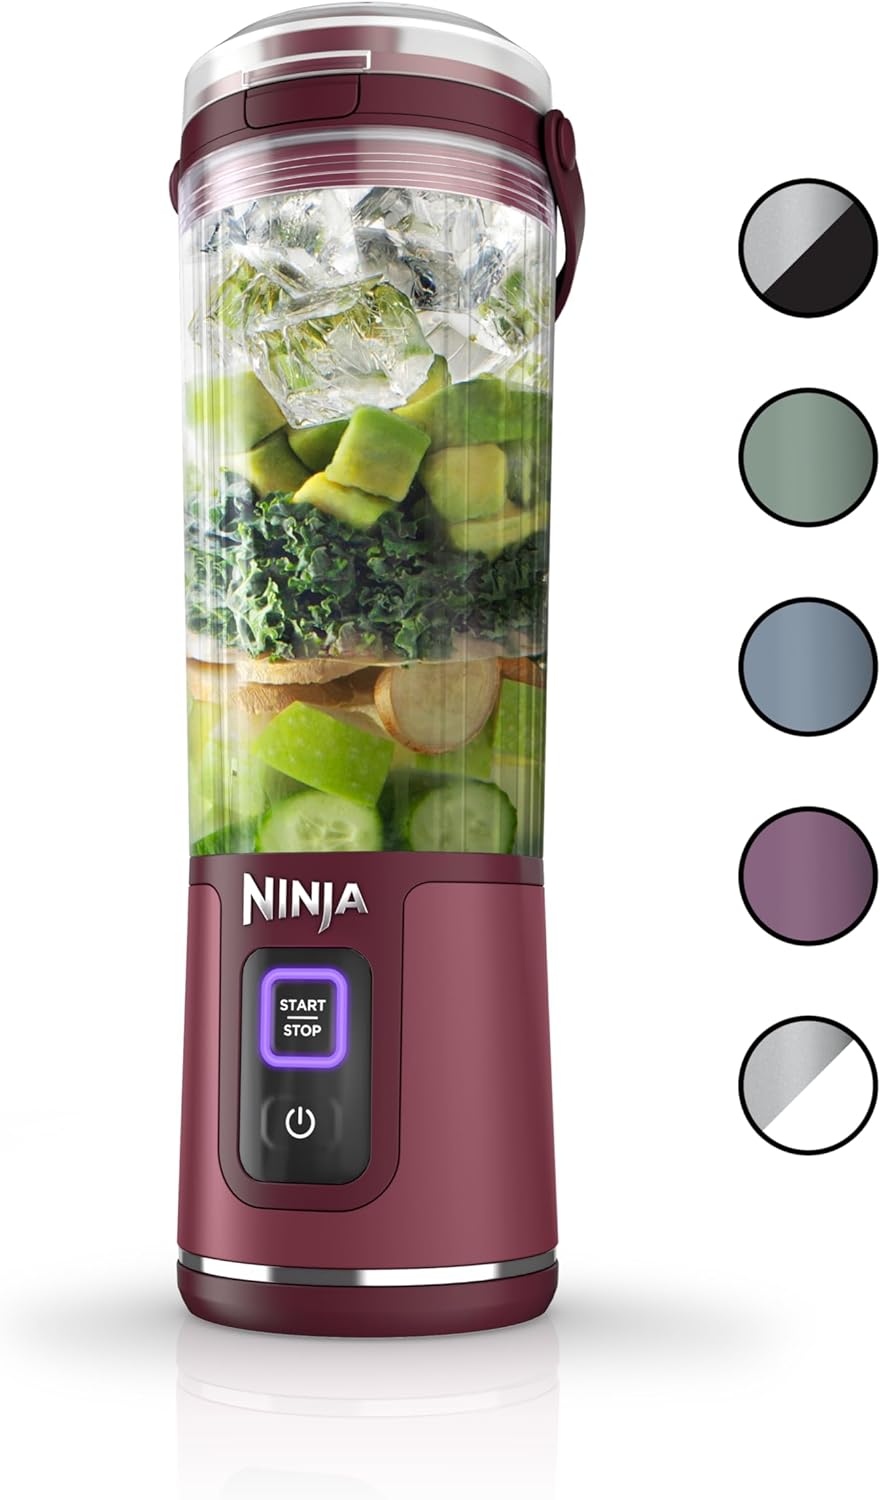 I am an avid fan of NINJA products, and once again, they have exceeded my expectations with the Ninja BC151WH Blast Portable Blender. I purchased this blender with the expectation that it would be a fantastic travel companion, and it has not disappointed.This cordless, 18oz. vessel blender is a game-changer for anyone on the go. I'm currently traveling, and having this personal blender with me has been a game-changer. It' incredibly convenient, and the cordless design adds a level of flexibilit